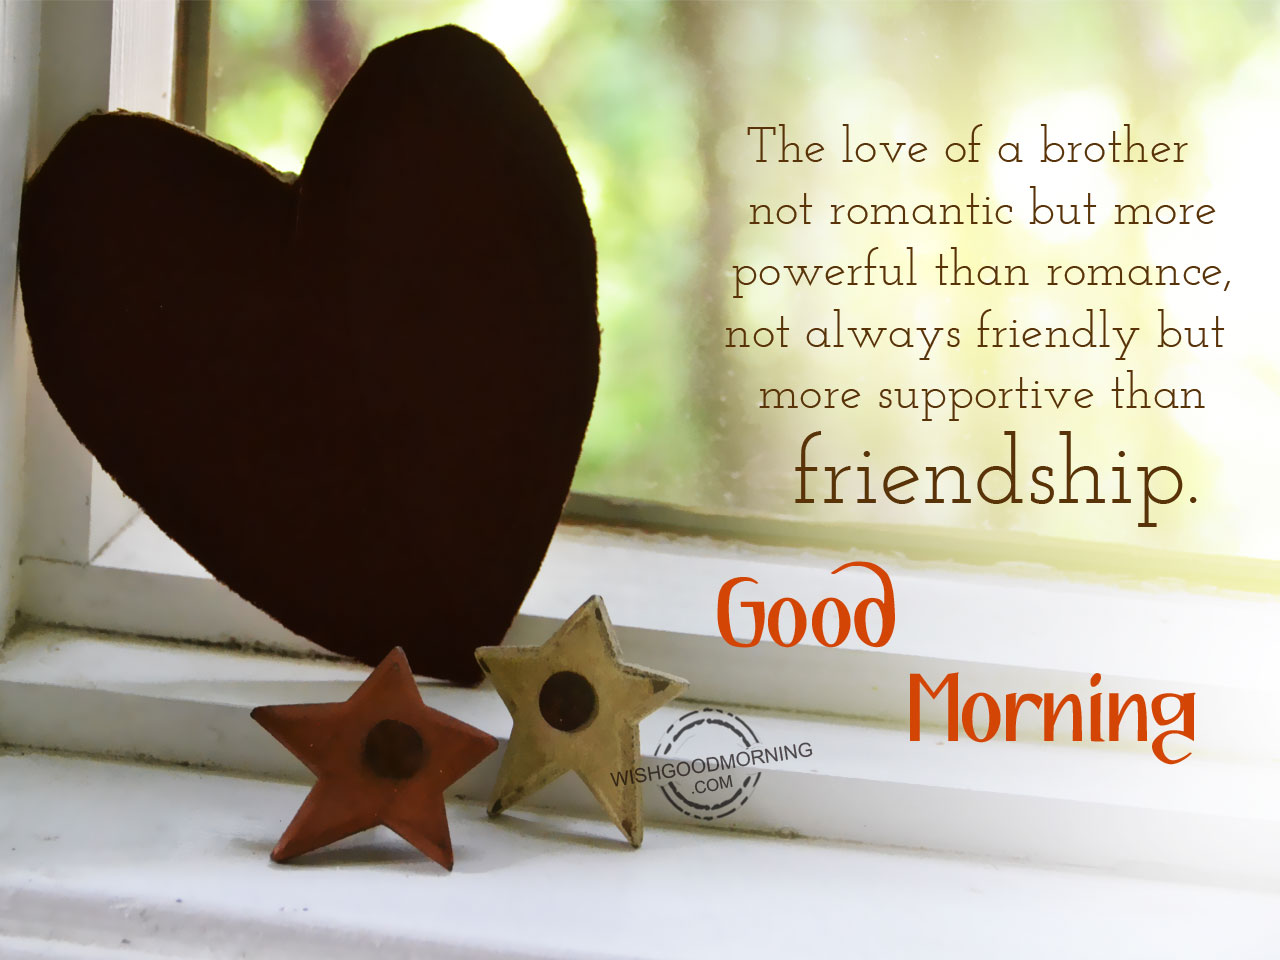 The love of a brother - Good Morning Pictures – WishGoodMorning.com